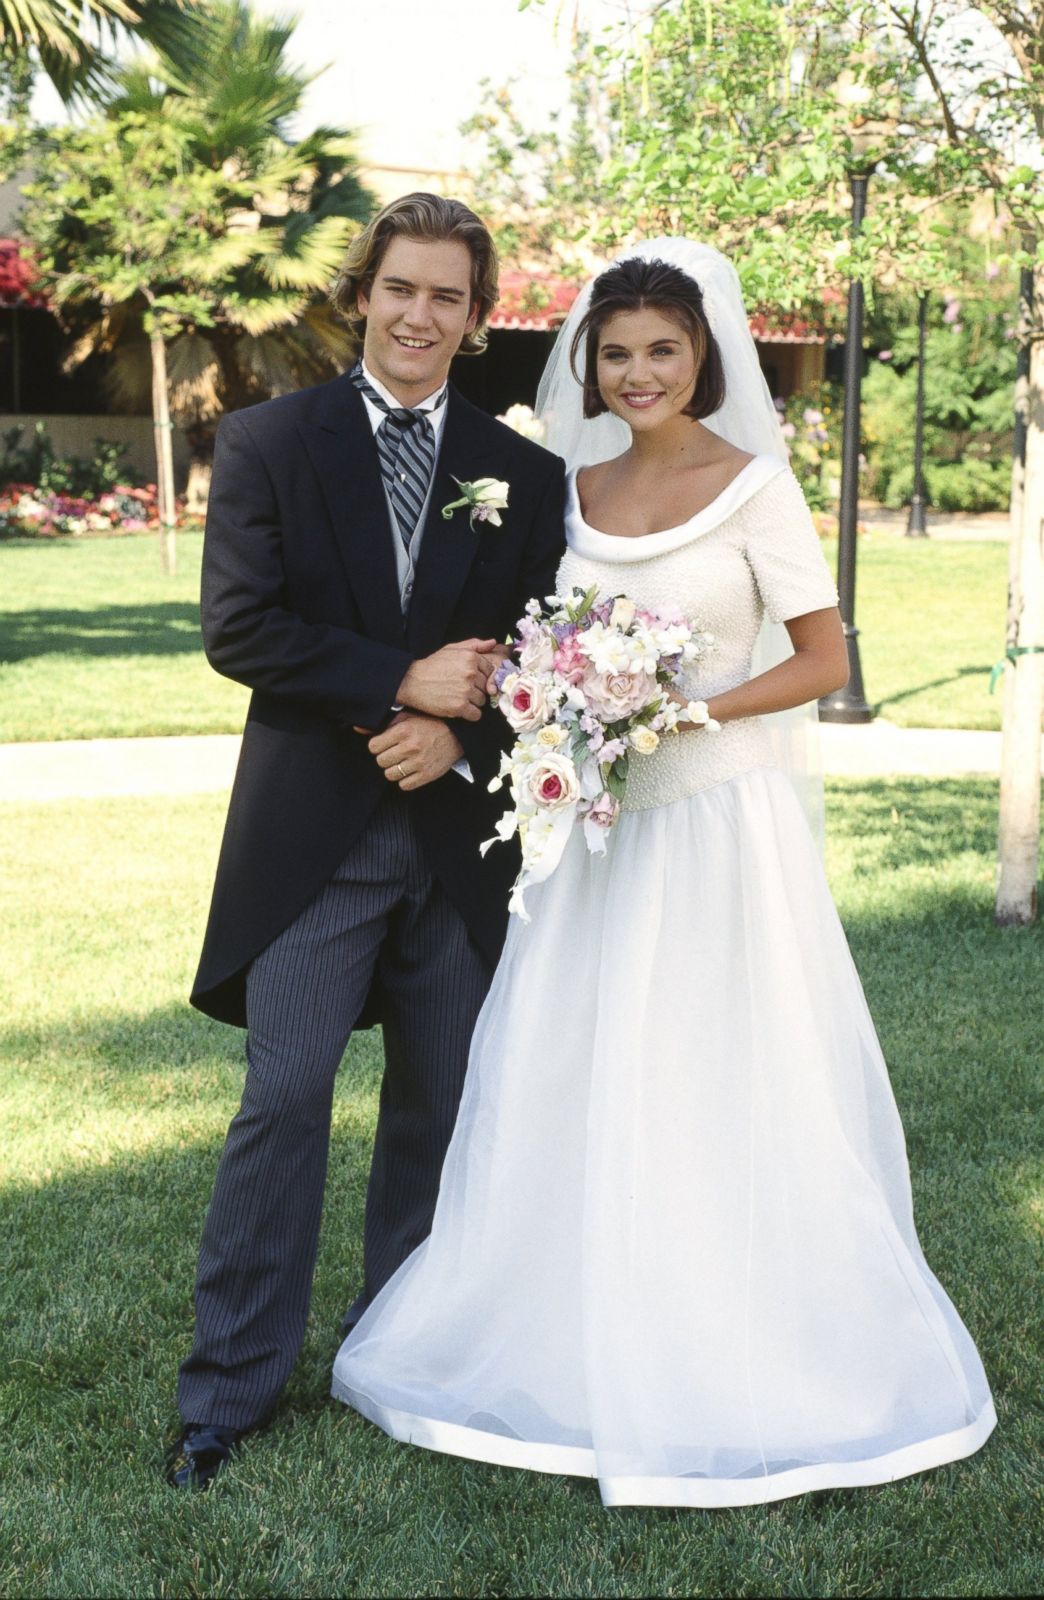 Wedding In Las Vegas Saved By The Bell The Most Memorable TV Weddings Ever! Photos | Image #61 - ABC News